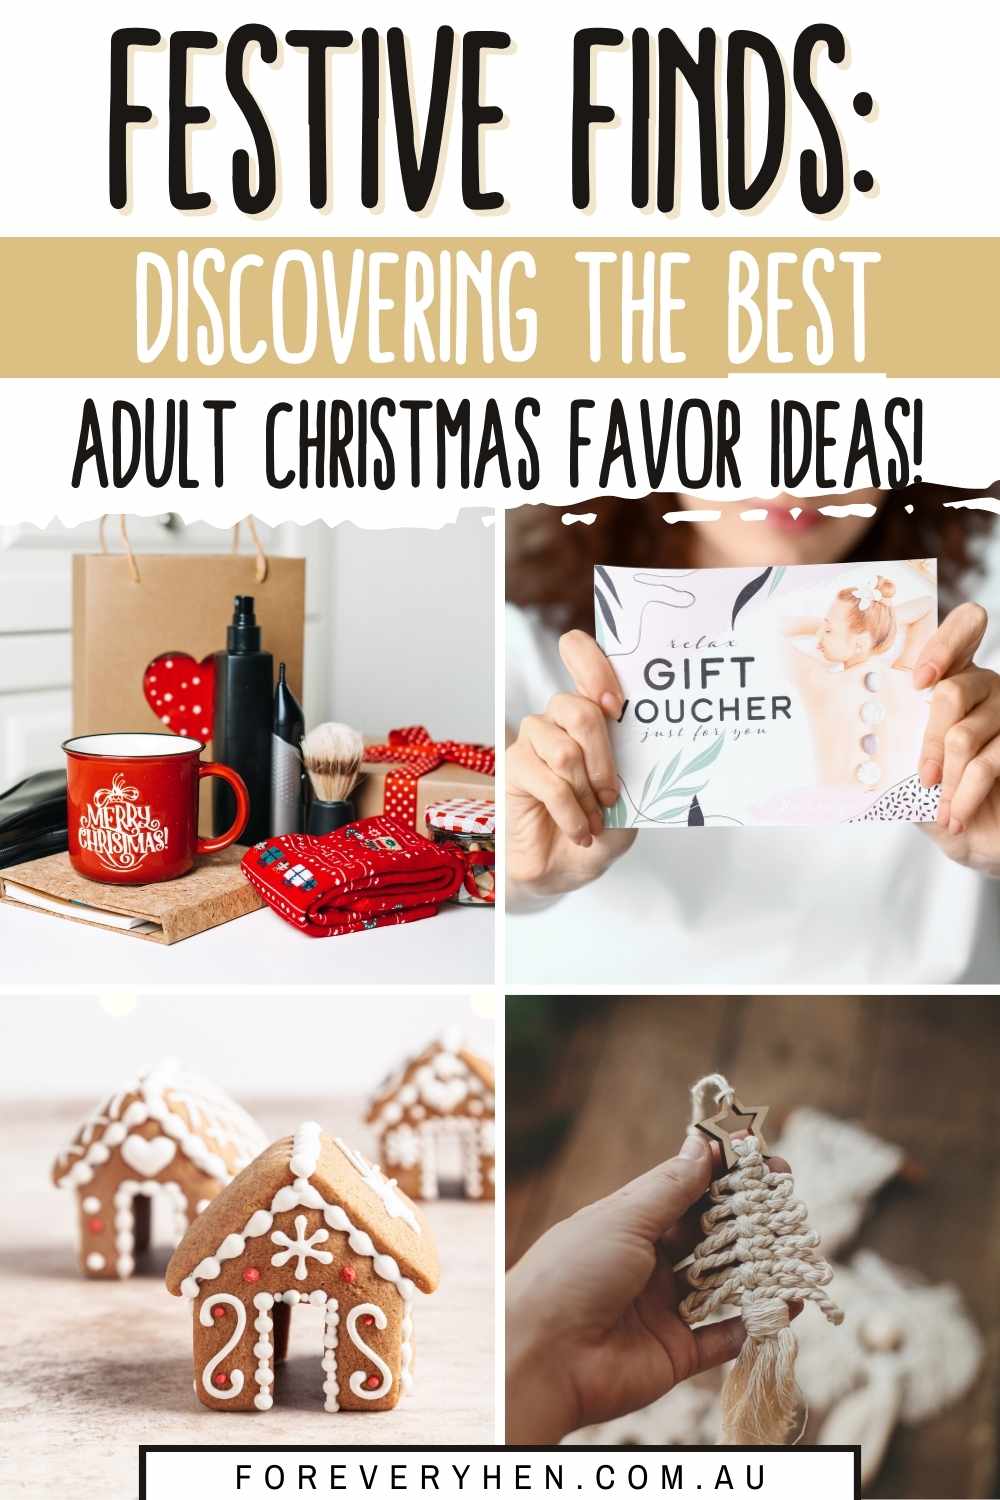 90+ Free Printable Rustic Christmas Tags for Gifts • Craving Some Creativity